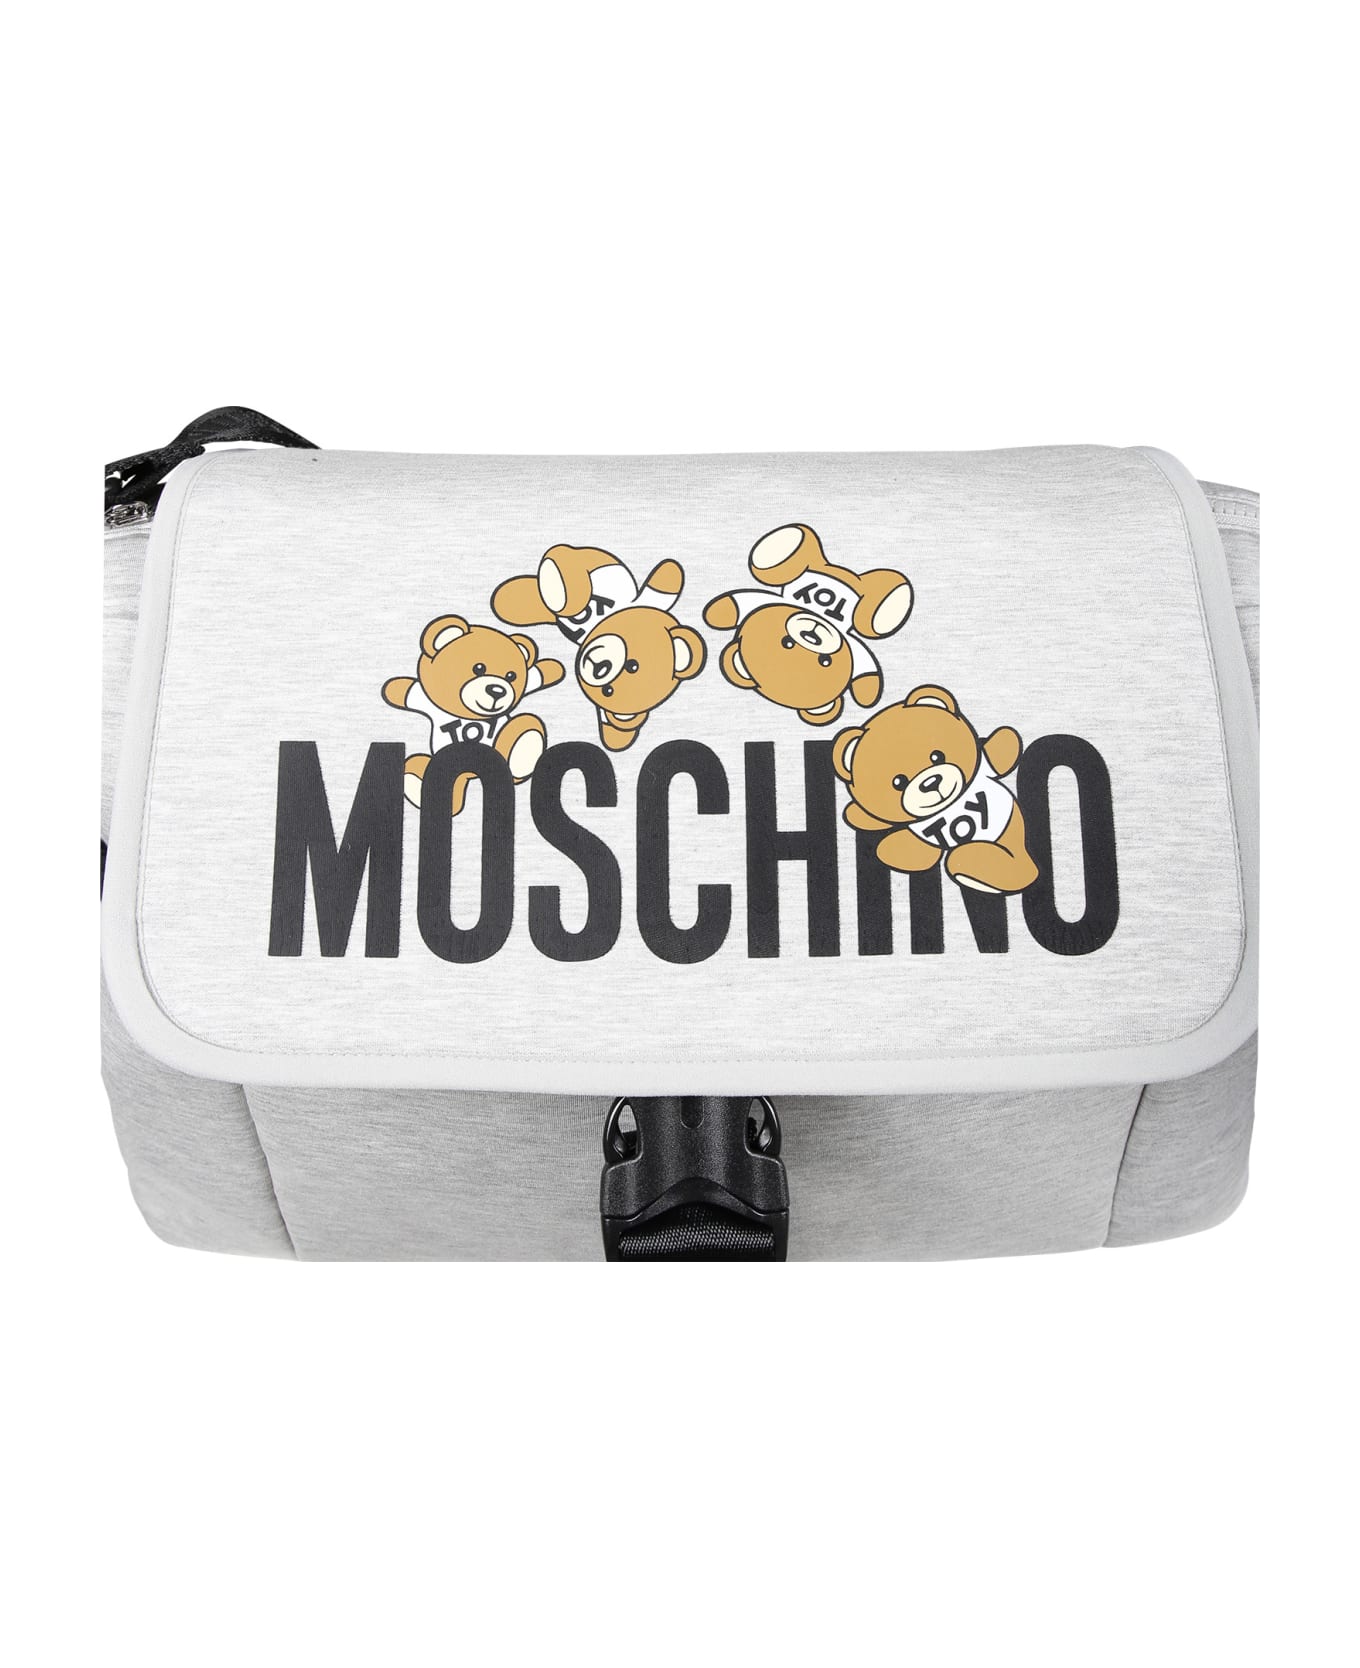 Moschino Gray Mother Bag For Babies With Teddy Bear And Logo - Grey